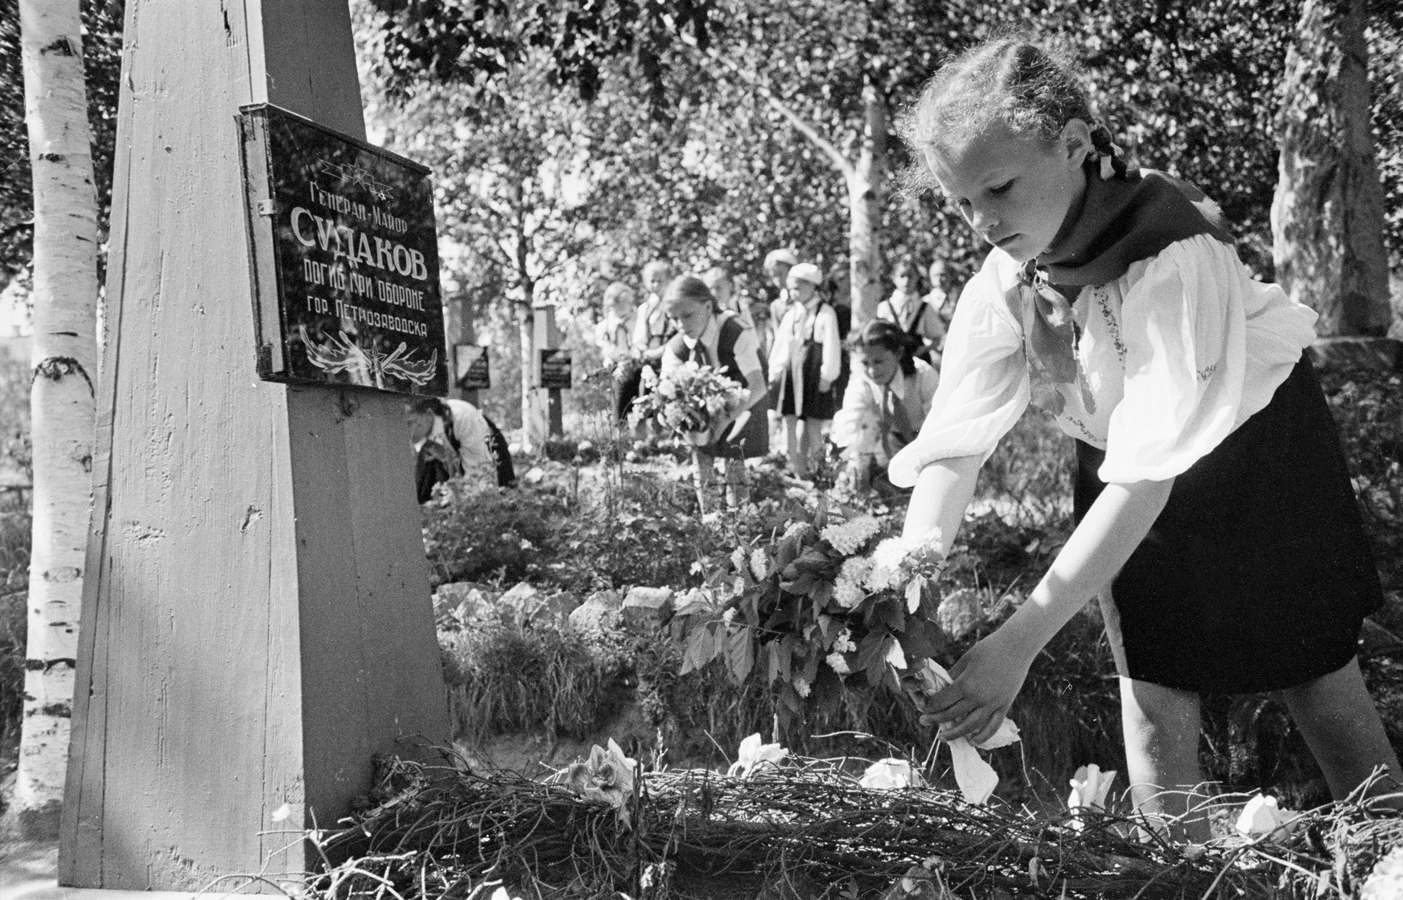 1950's. Common Grave of Communists